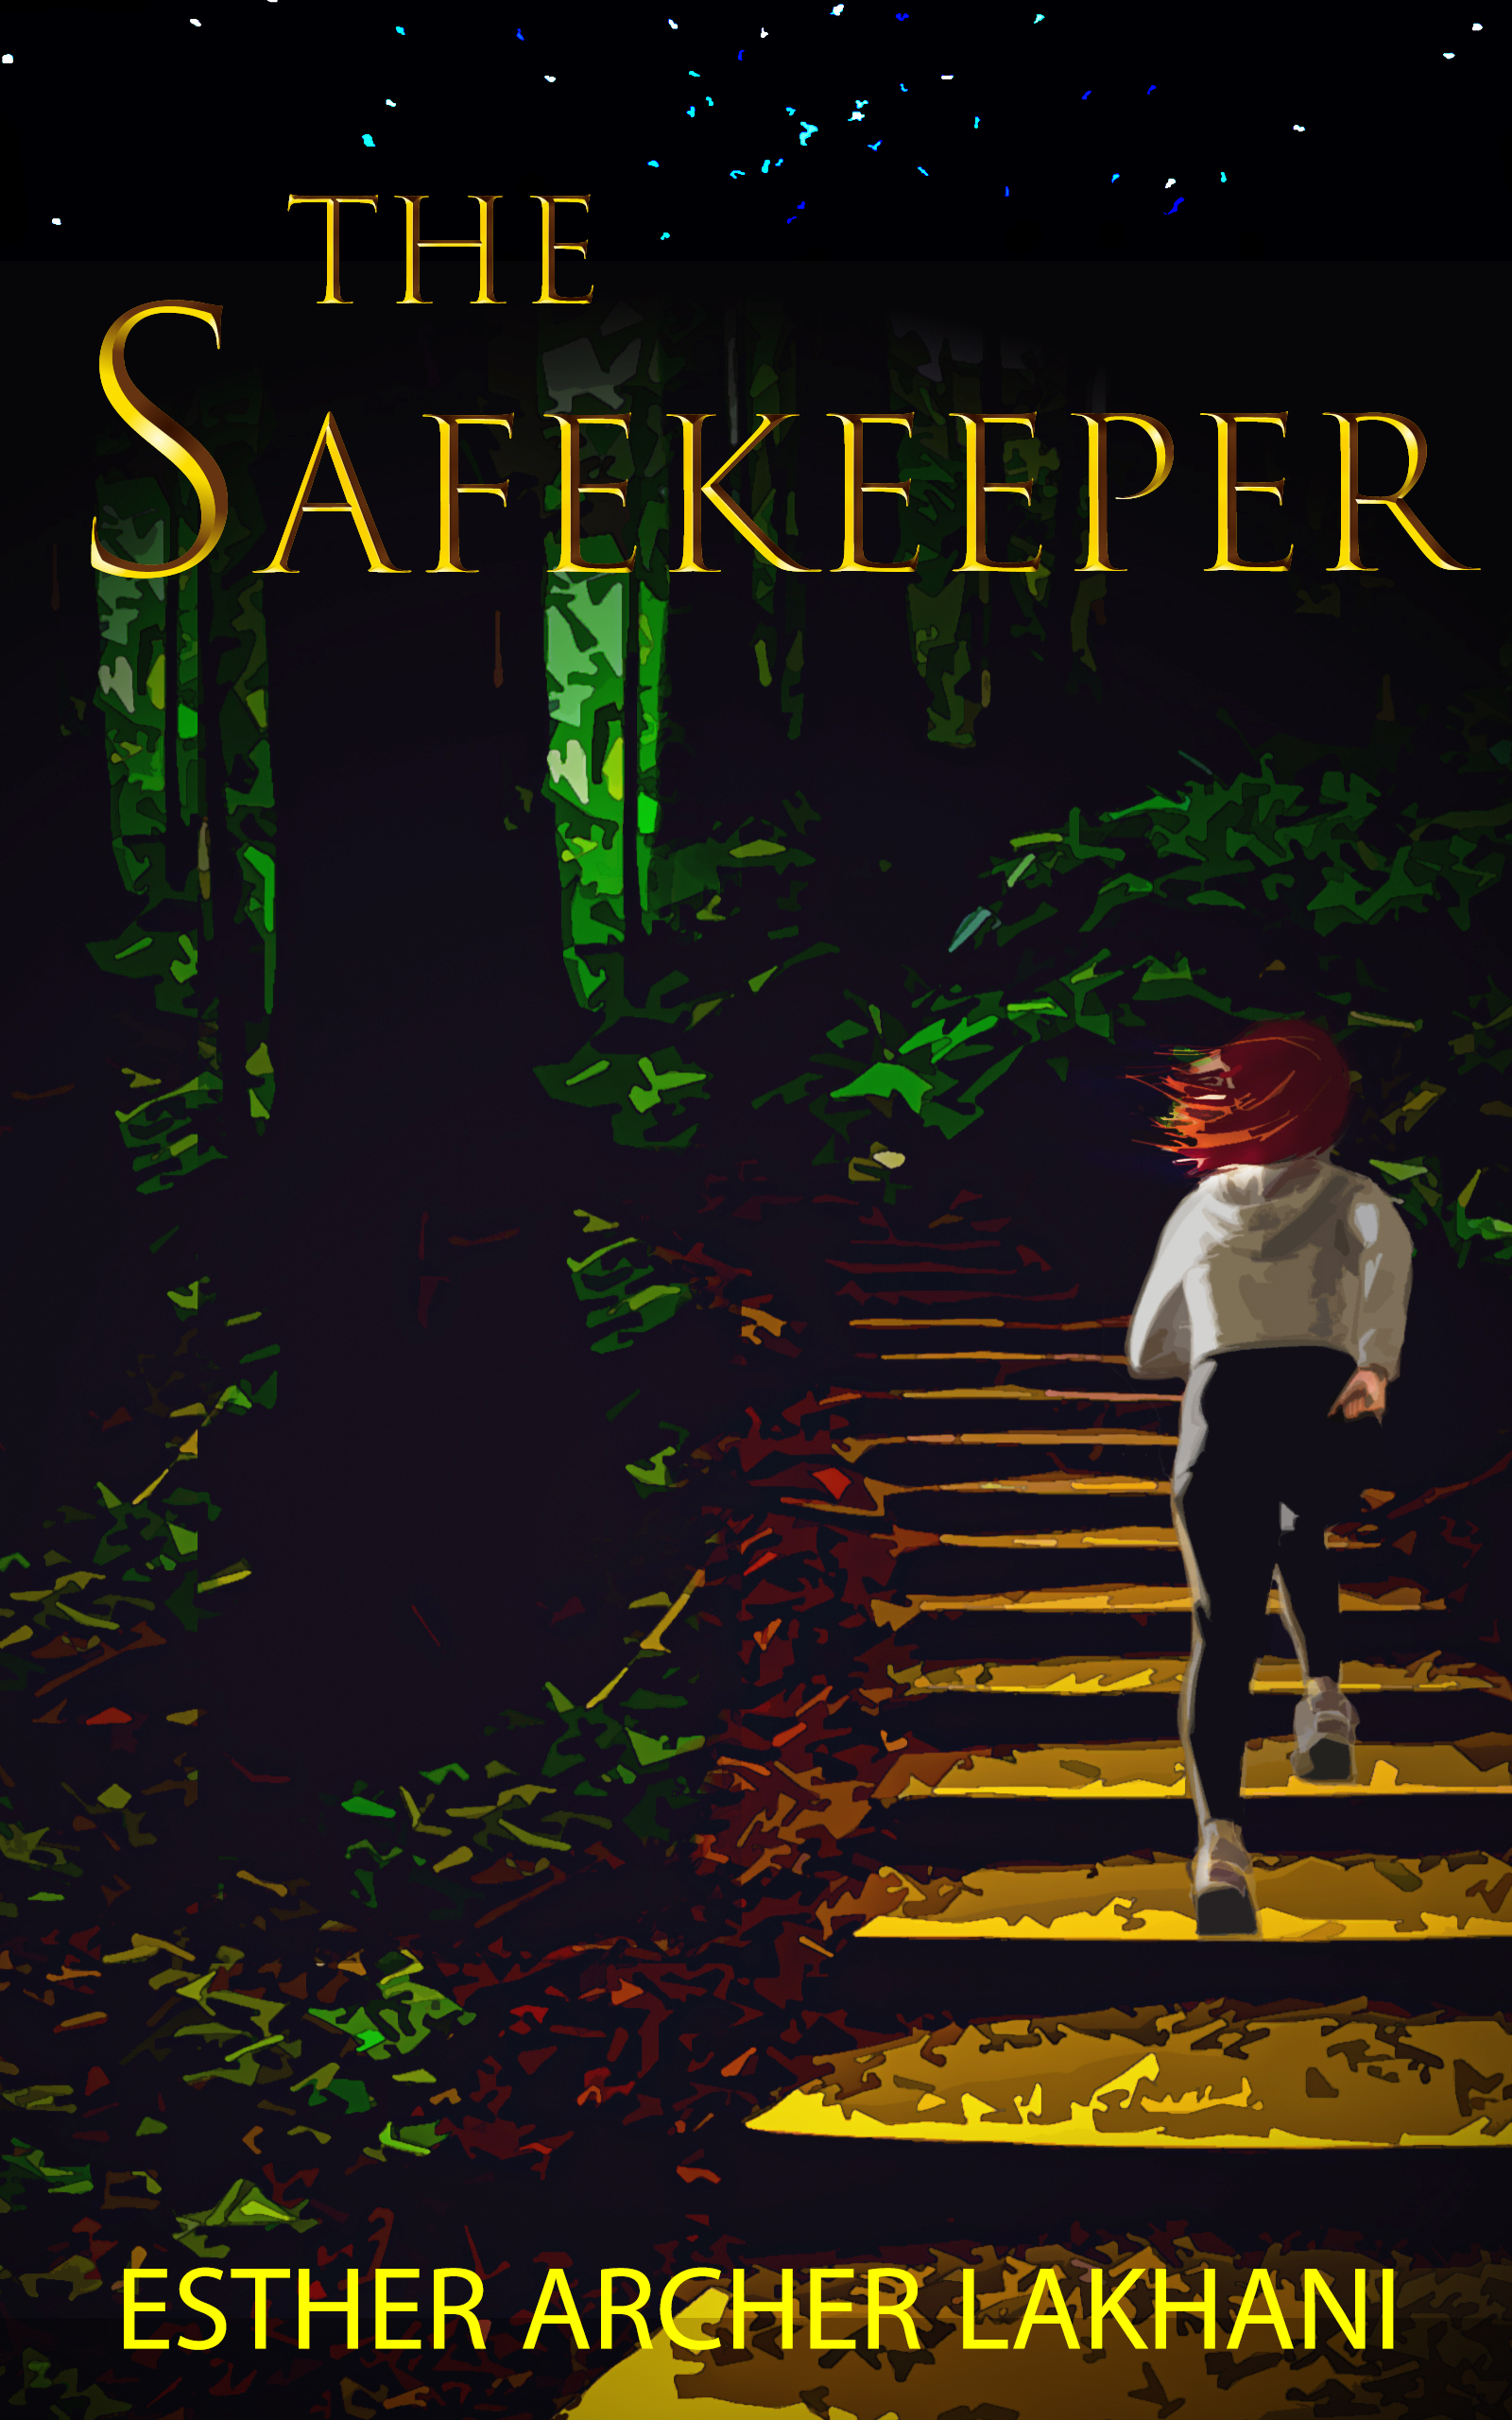 FREE: The Safekeeper by Esther Archer Lakhani